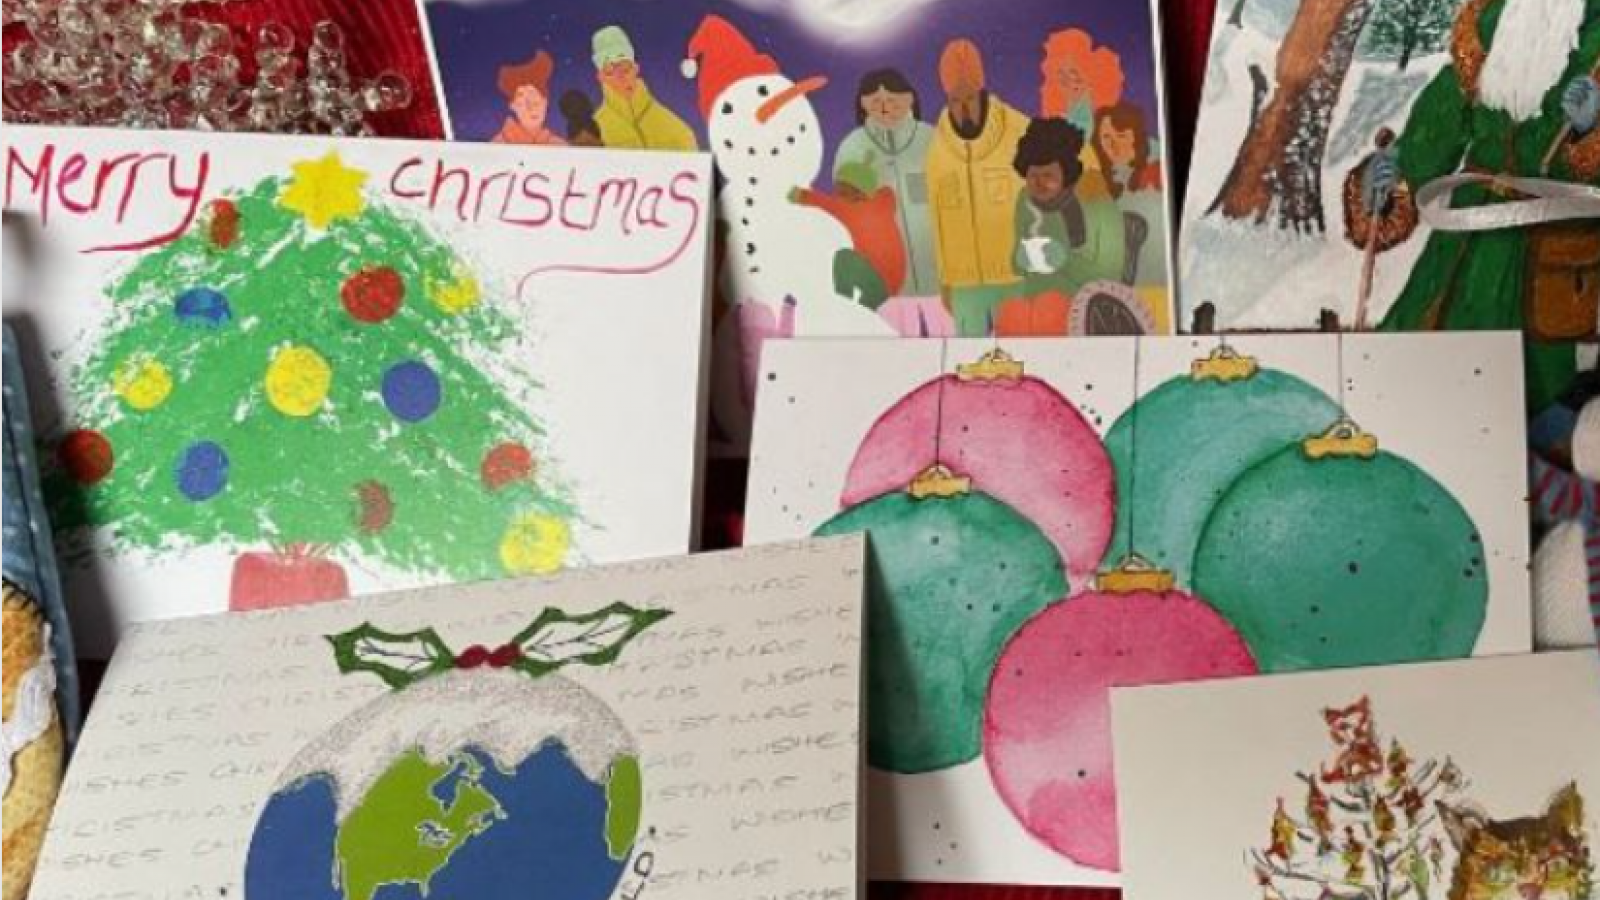 A selection of Christmas cards